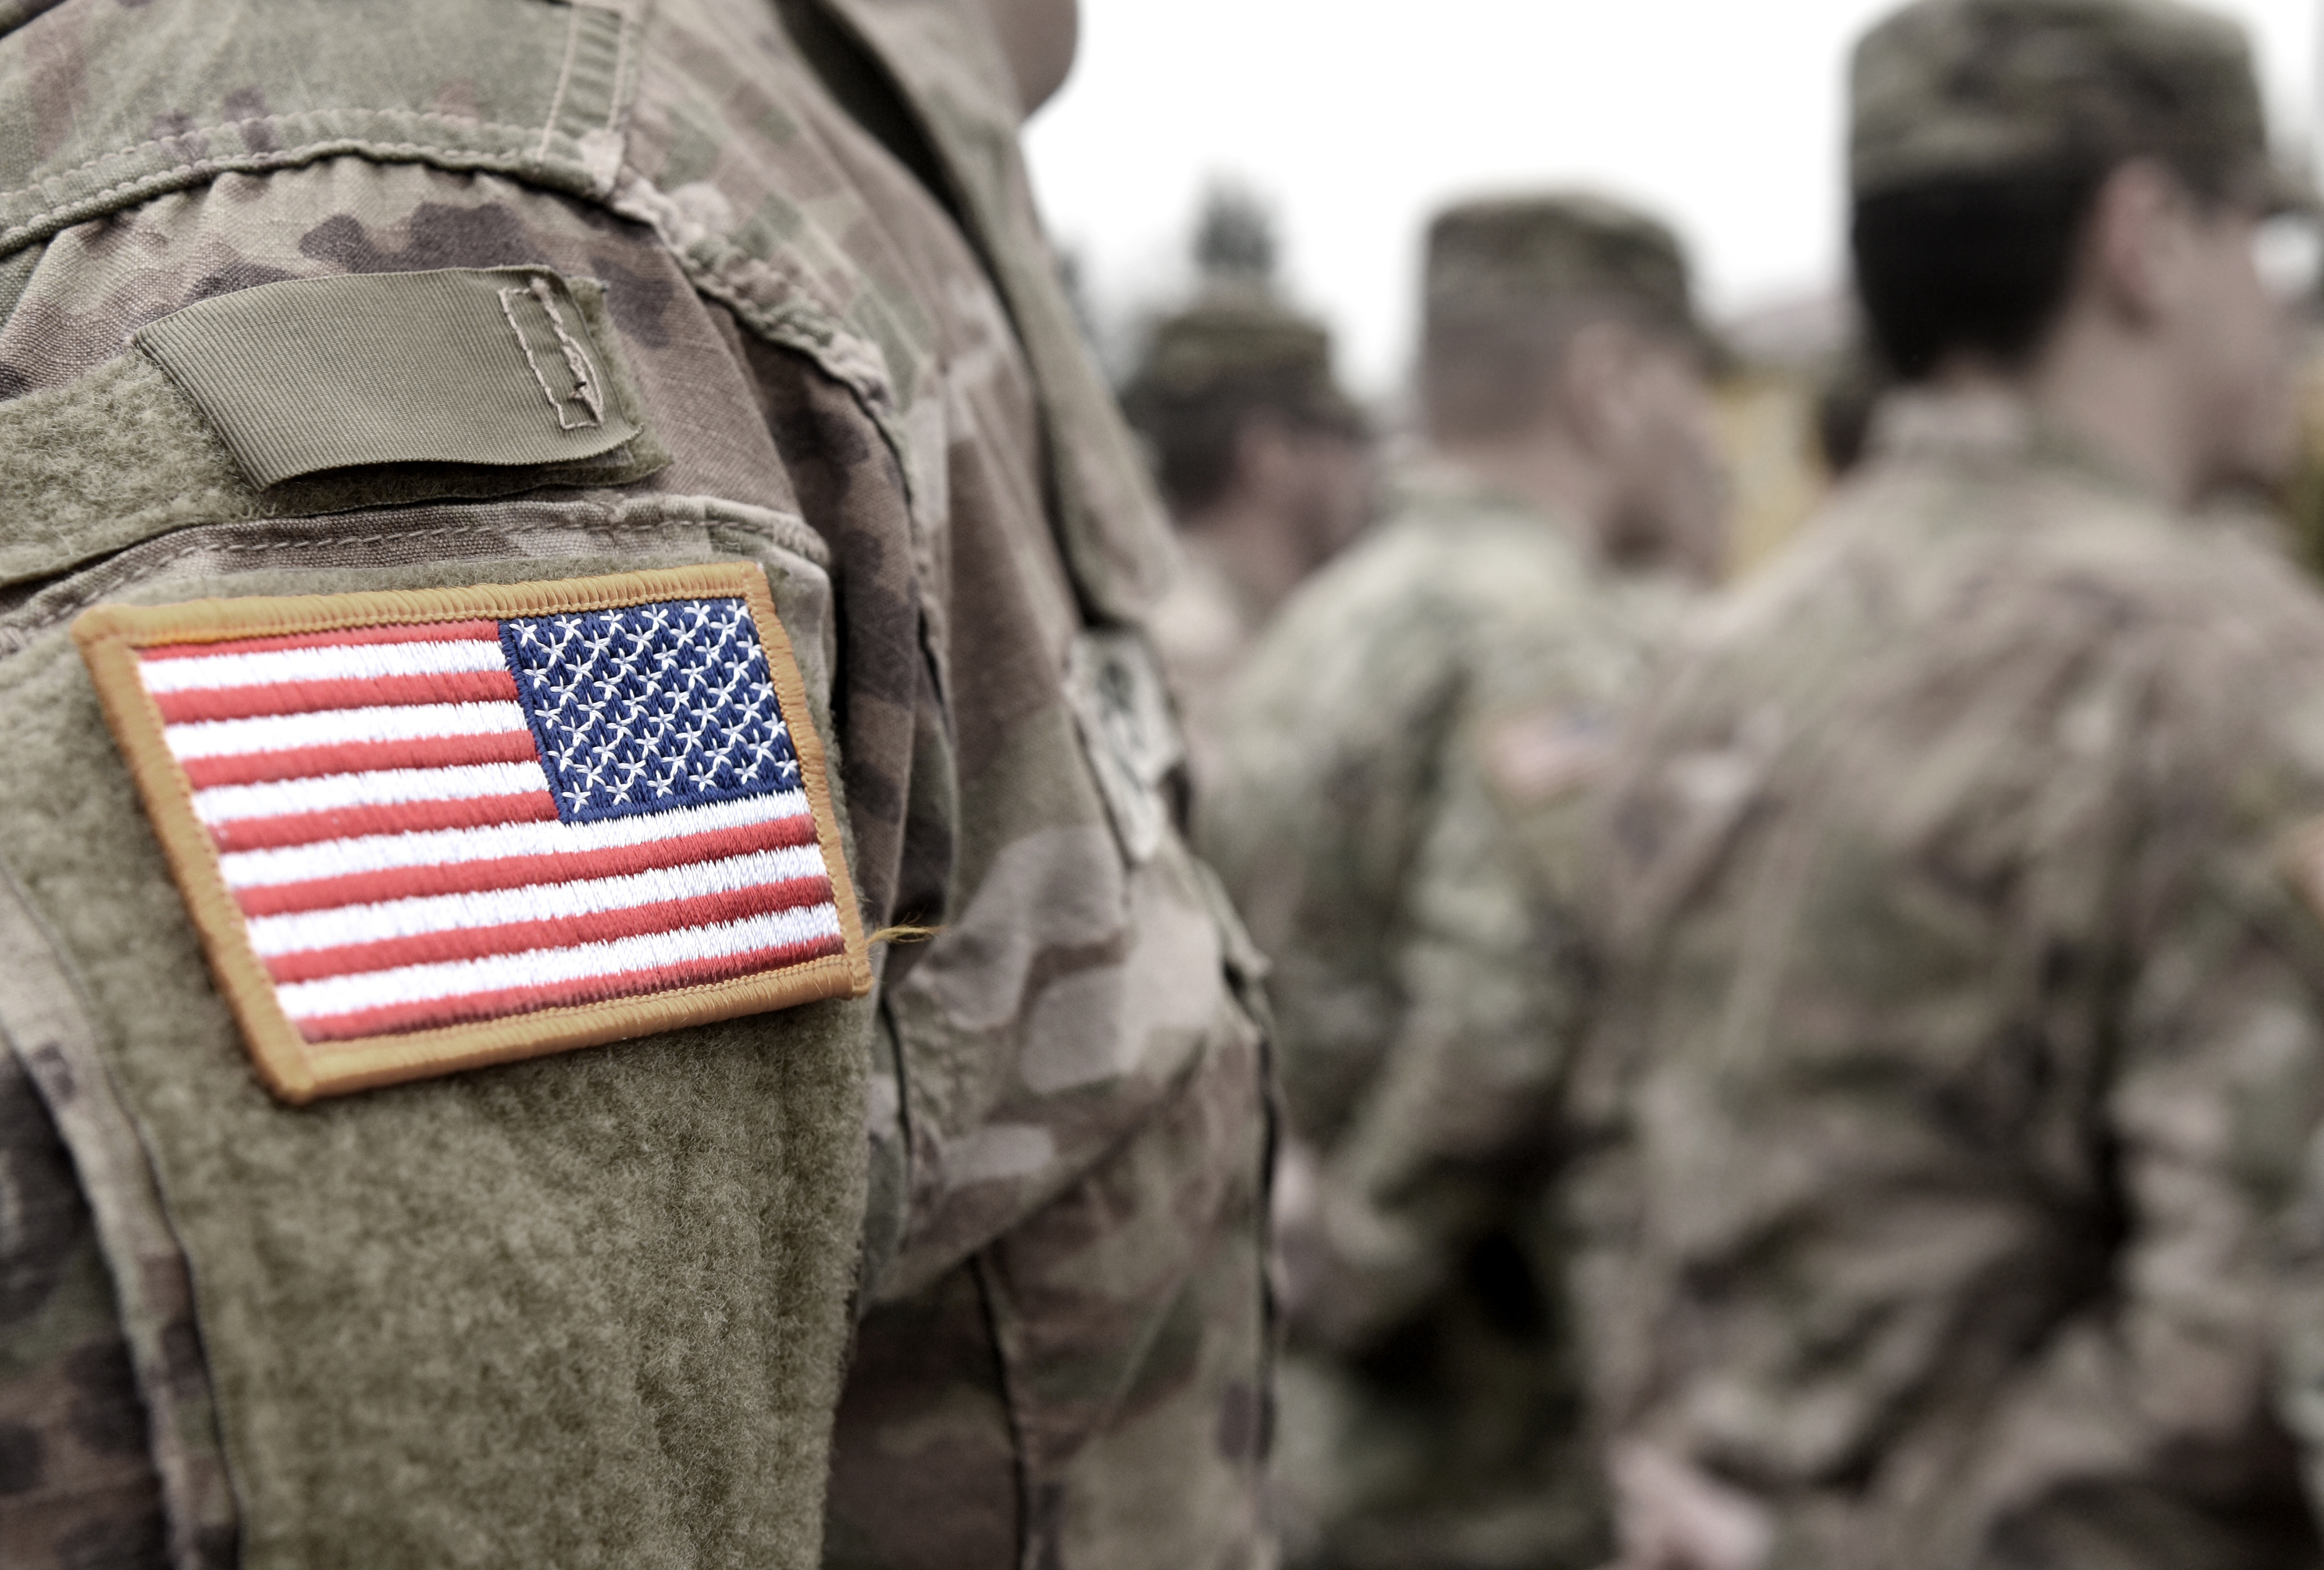 Close-up of the U.S. flag on a soldier's uniform | Source: Shutterstock